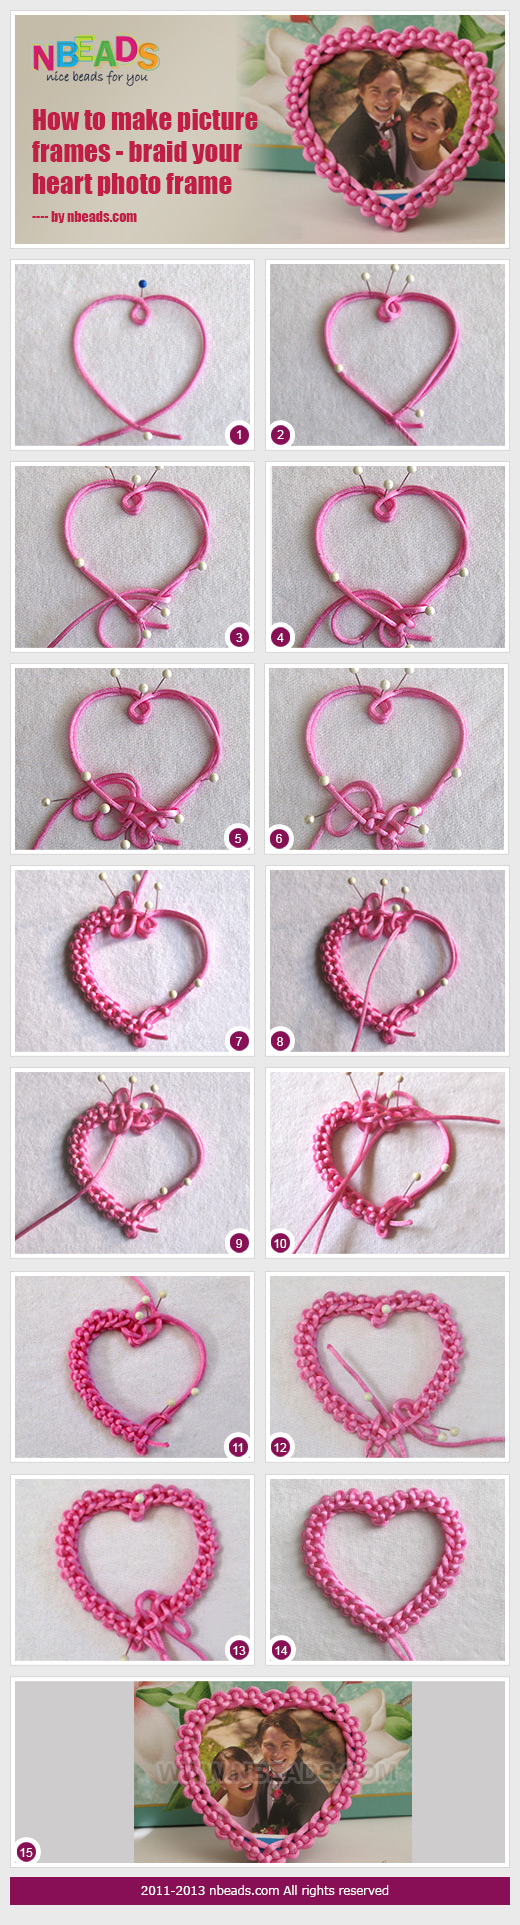 how to make picture frames - braid your heart photo frame